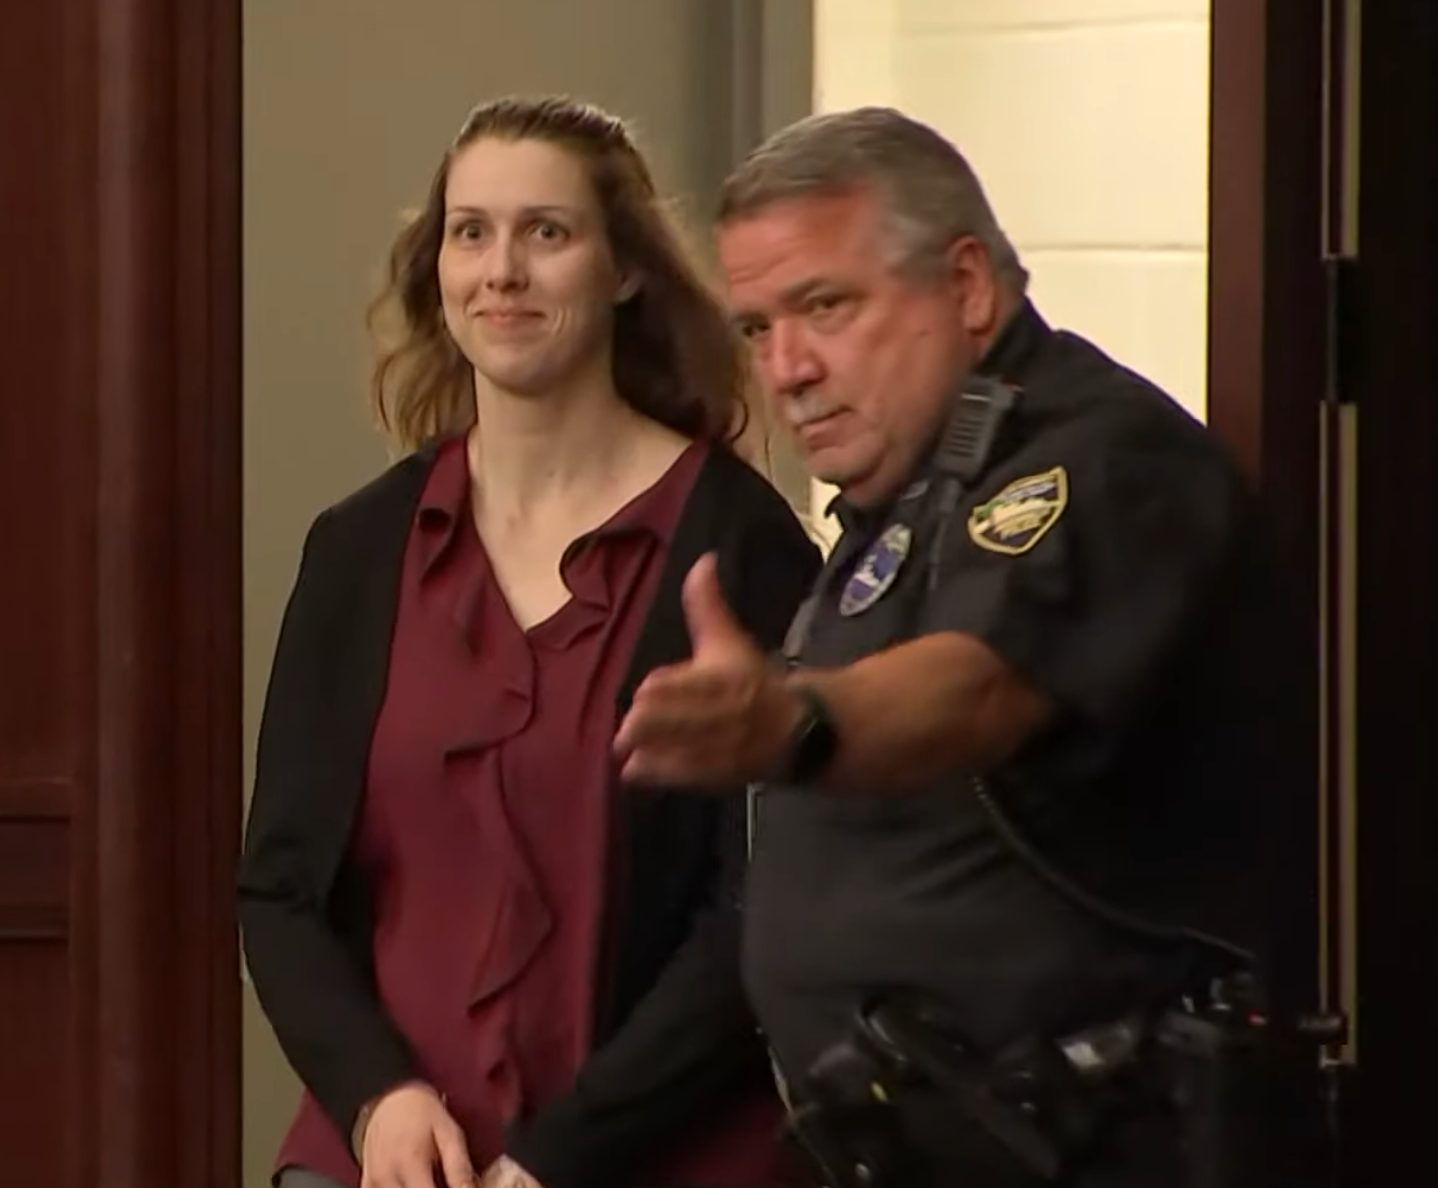 Will Shanna Gardner be released on bond in ex's murder? Here's what the judge decided